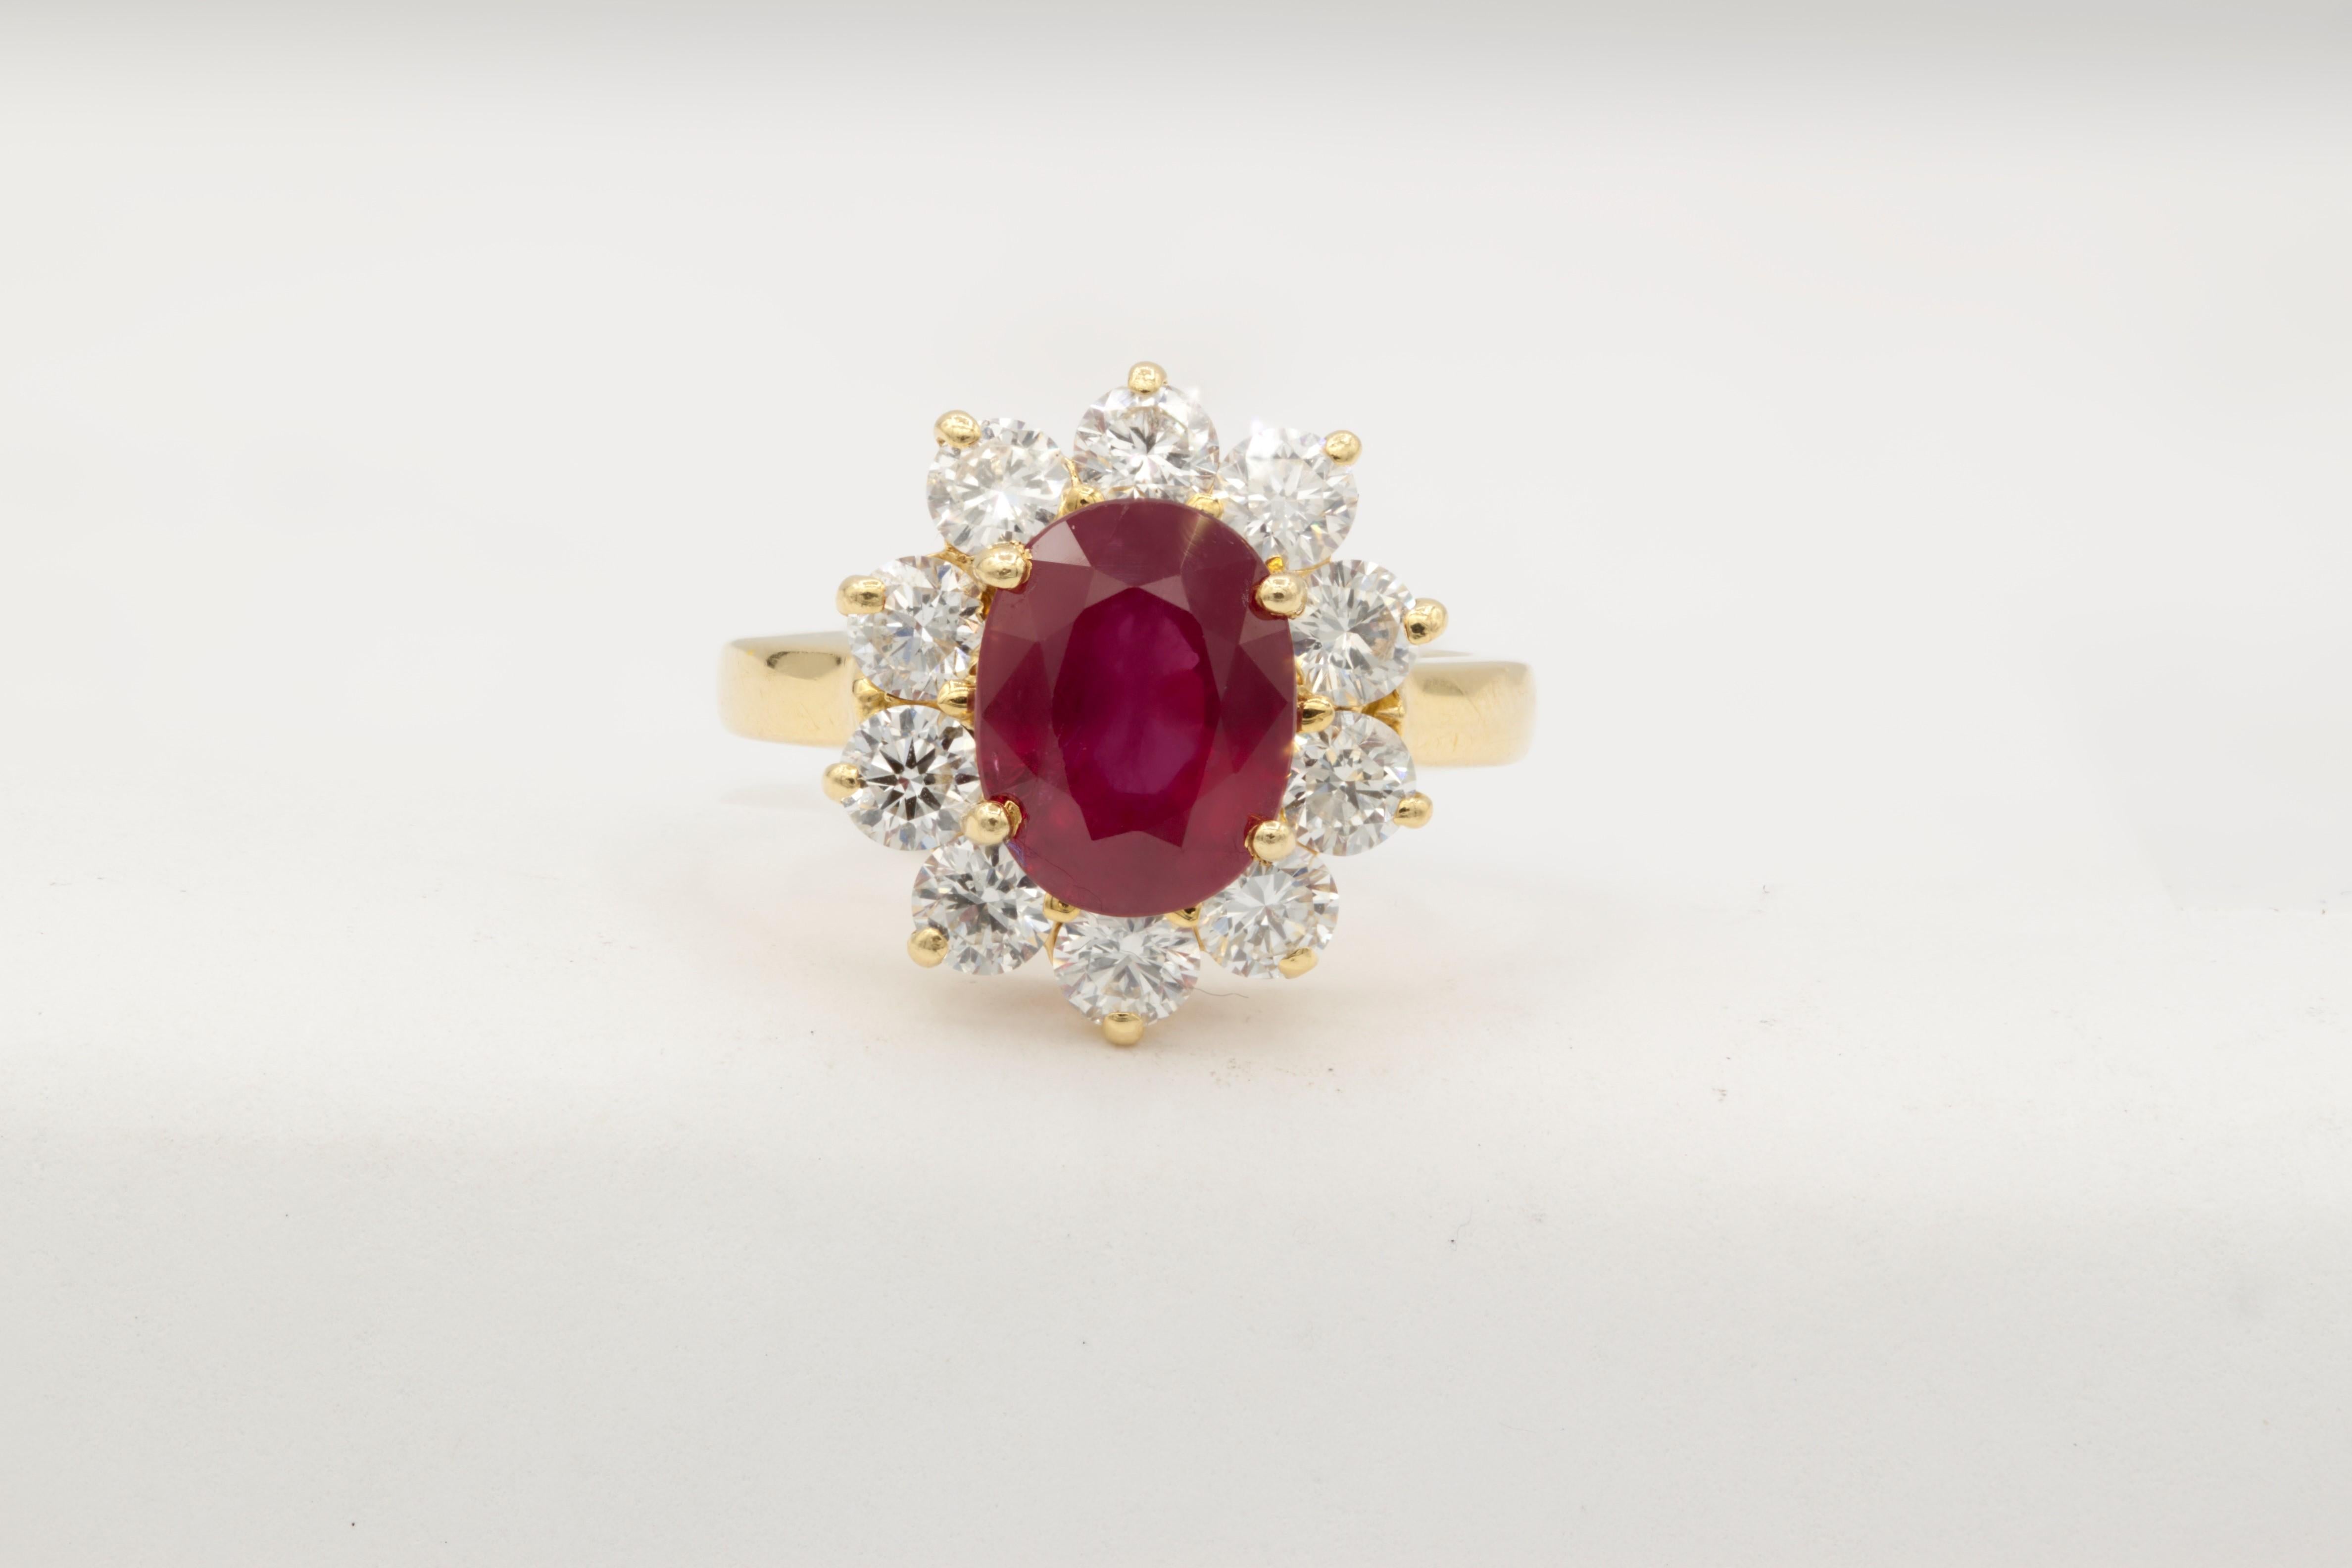 18 kt yellow gold Princess Diana ring with a flower shaped design featuring a center 3.50 ct ruby surrounded by 1.50 cts tw of round diamonds.
Diana M. is a leading supplier of top-quality fine jewelry for over 35 years.
Diana M is one-stop shop for